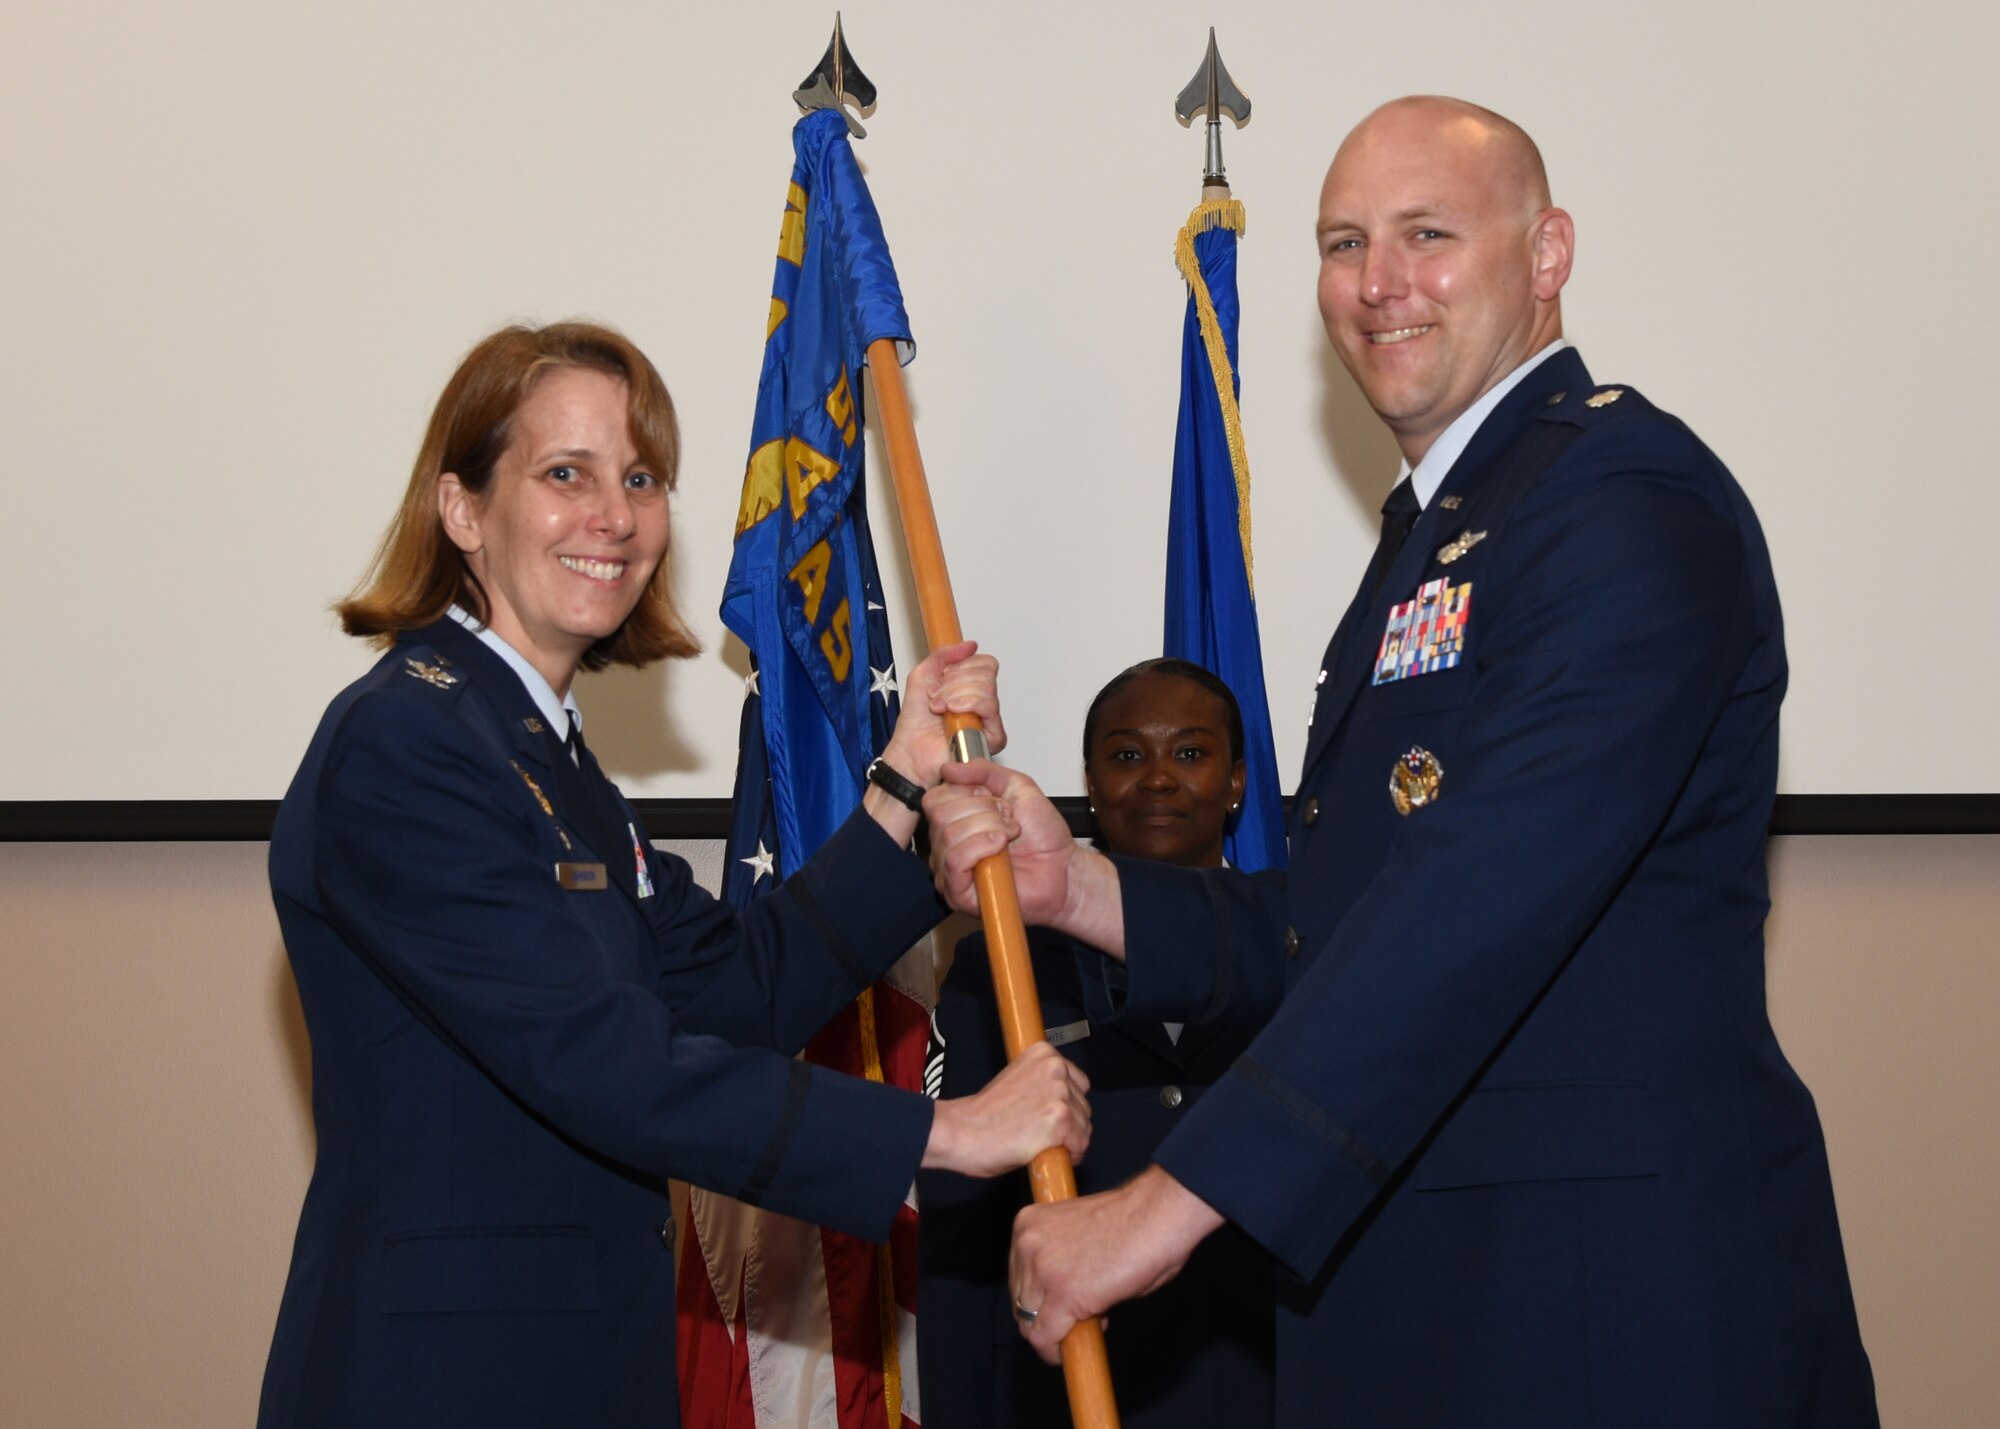 Lt. Col. Matthew Sikkink assumed command of the 815th Airlift Squadron from Col. Jennie R. Johnson, 403rd Wing commander, during change of command ceremony June 6, 2019. (U.S. Air Force photo by Master Sgt. Jessica Kendziorek)